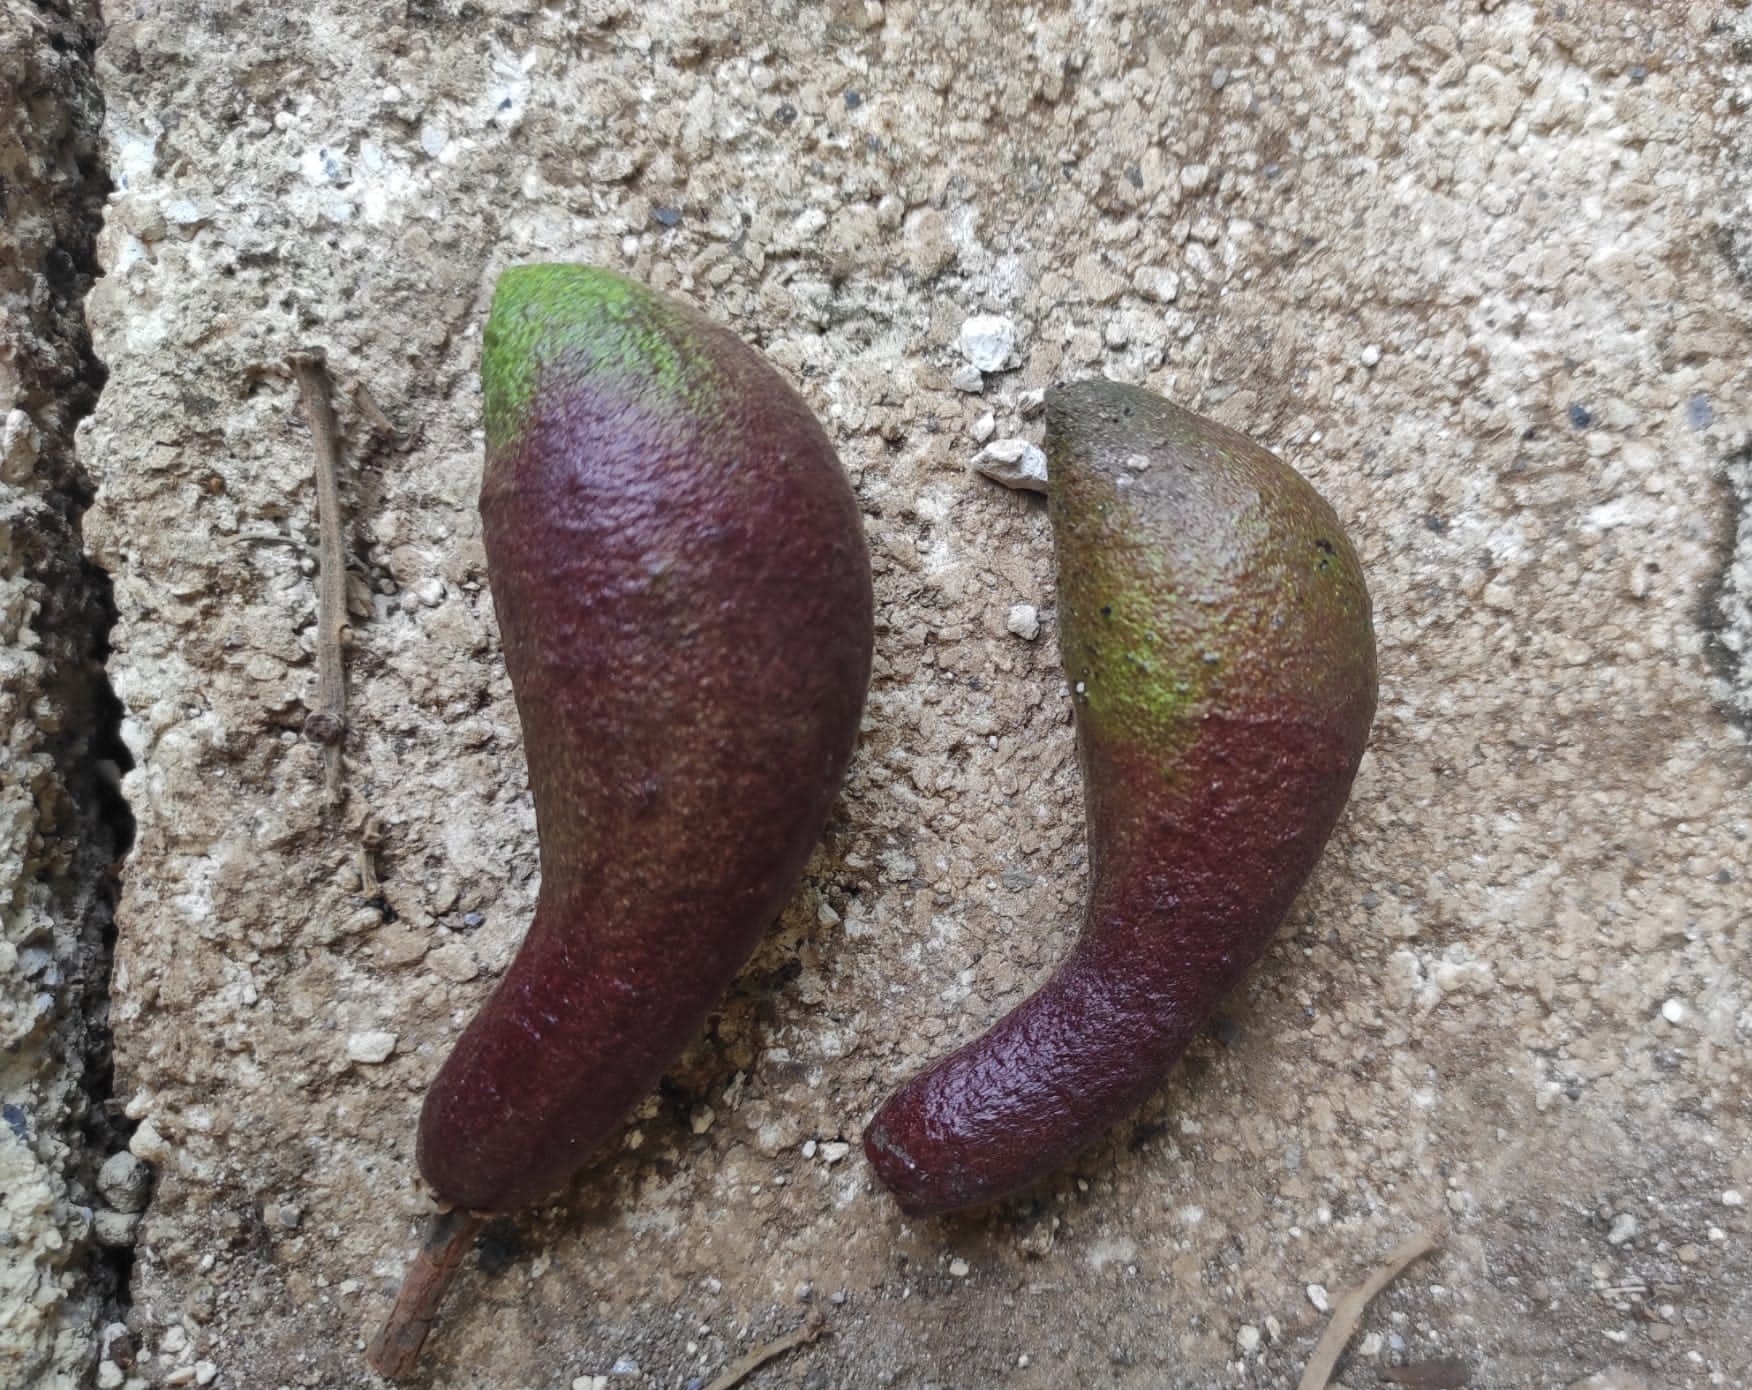 Two wild avocados are curved from the stem and plumpen towards one end